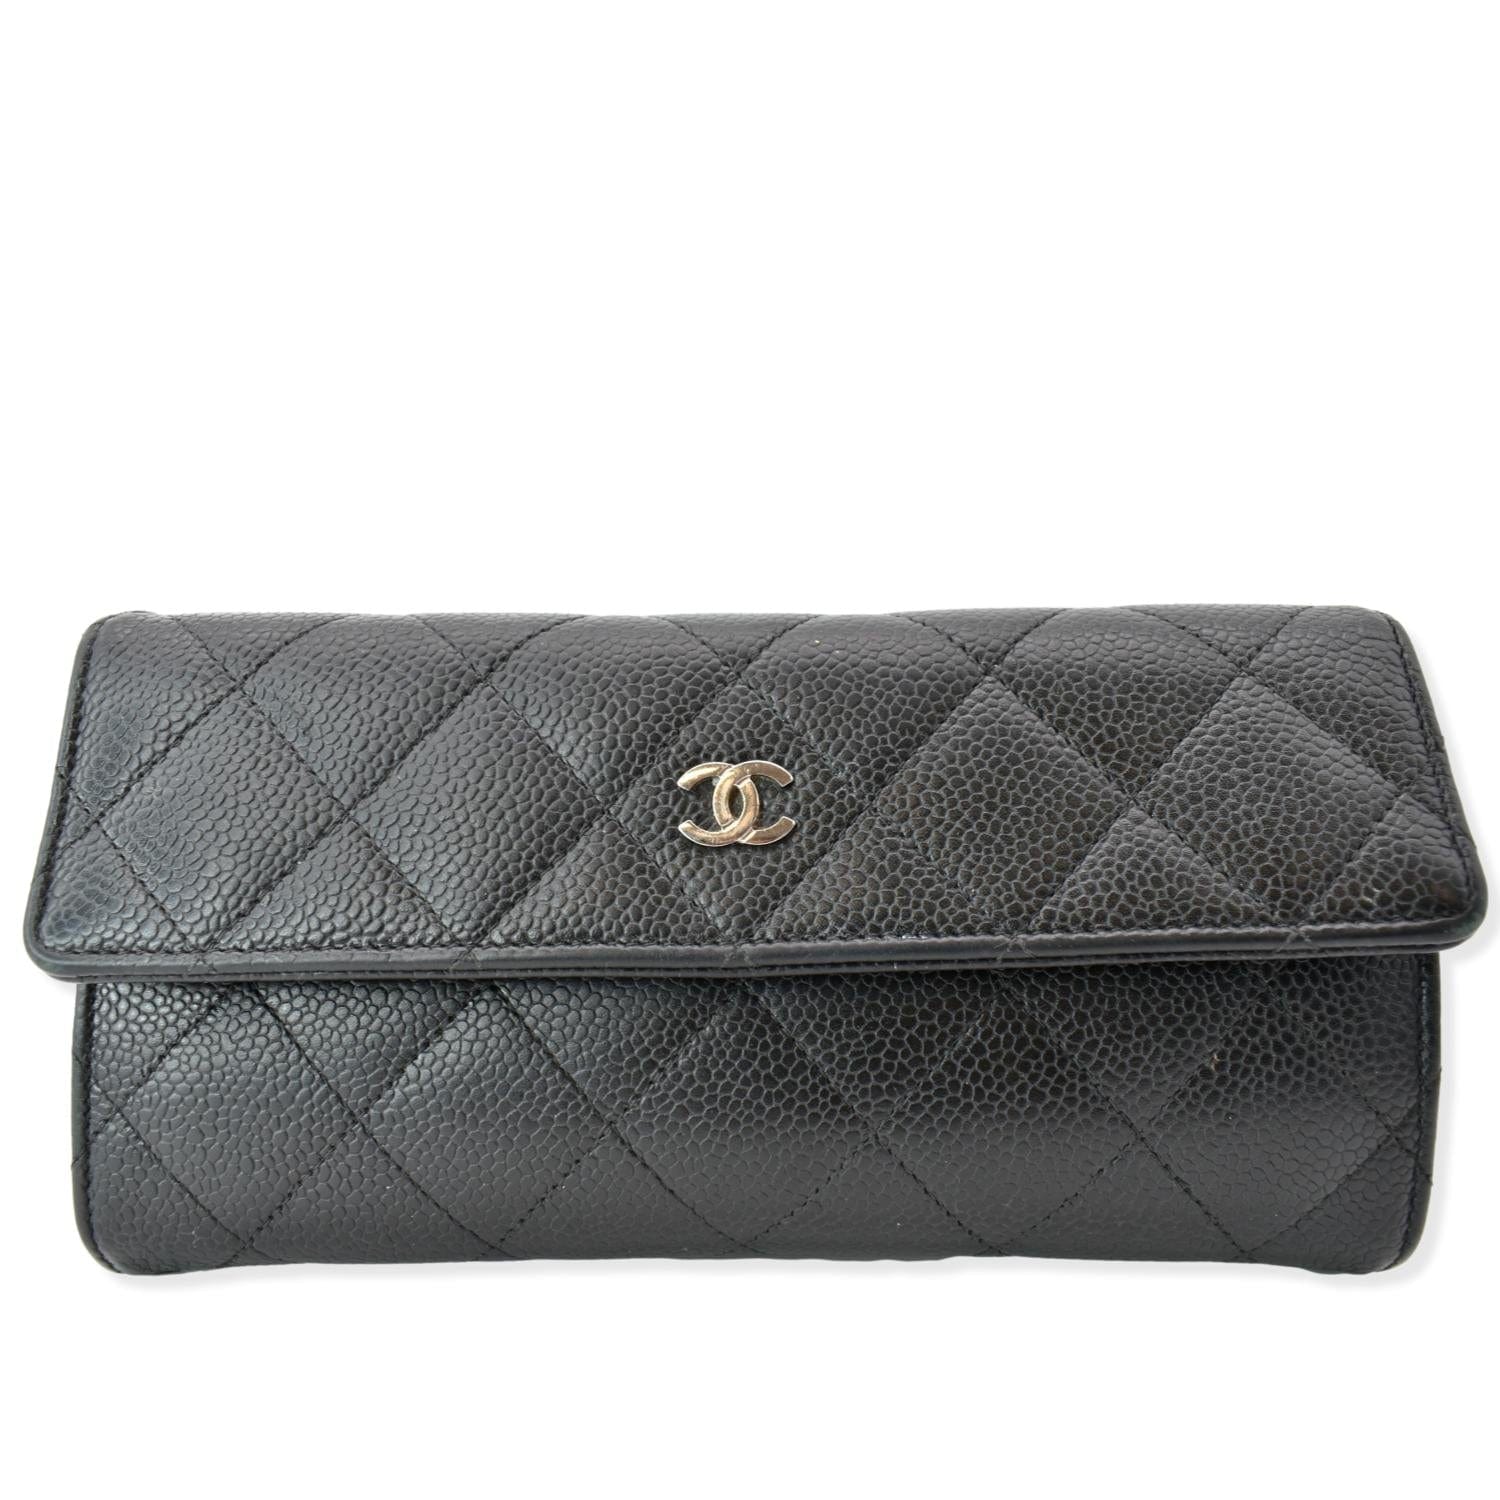 Chanel Black Quilted Caviar Long Flap Wallet, myGemma